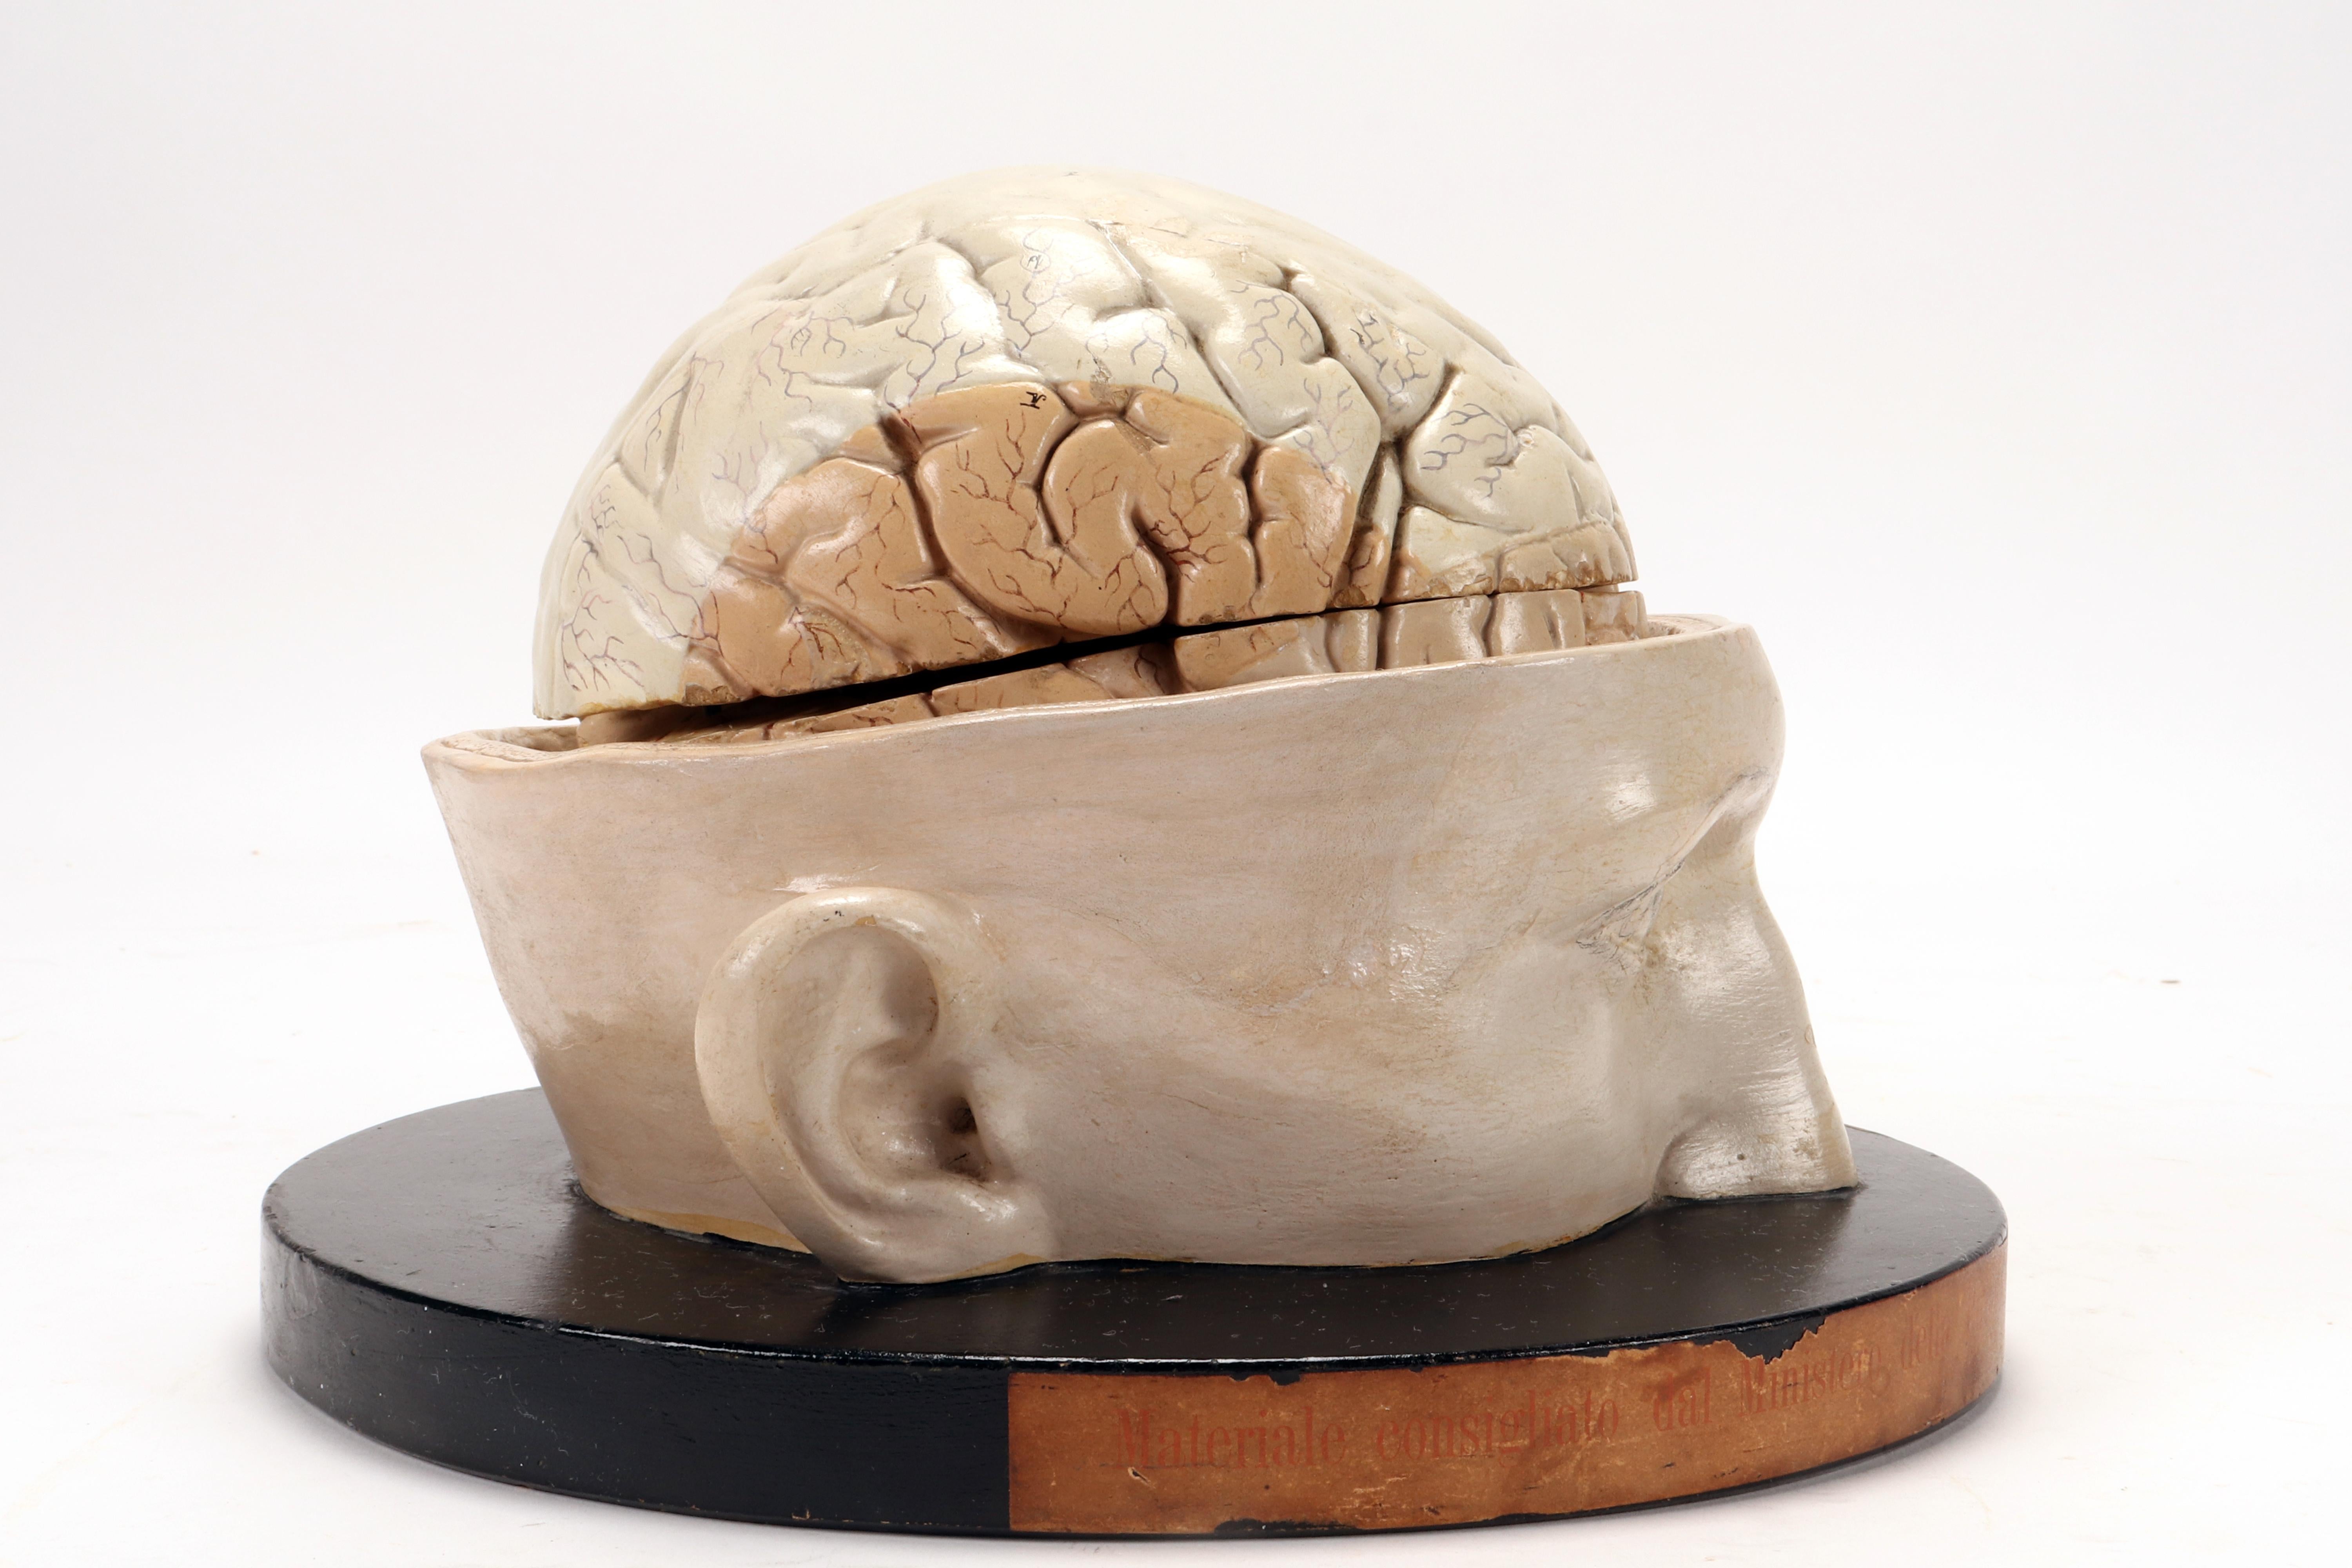 Italian Anatomical model: a brain inserted into a sectioned skullcap, Italy 1920.